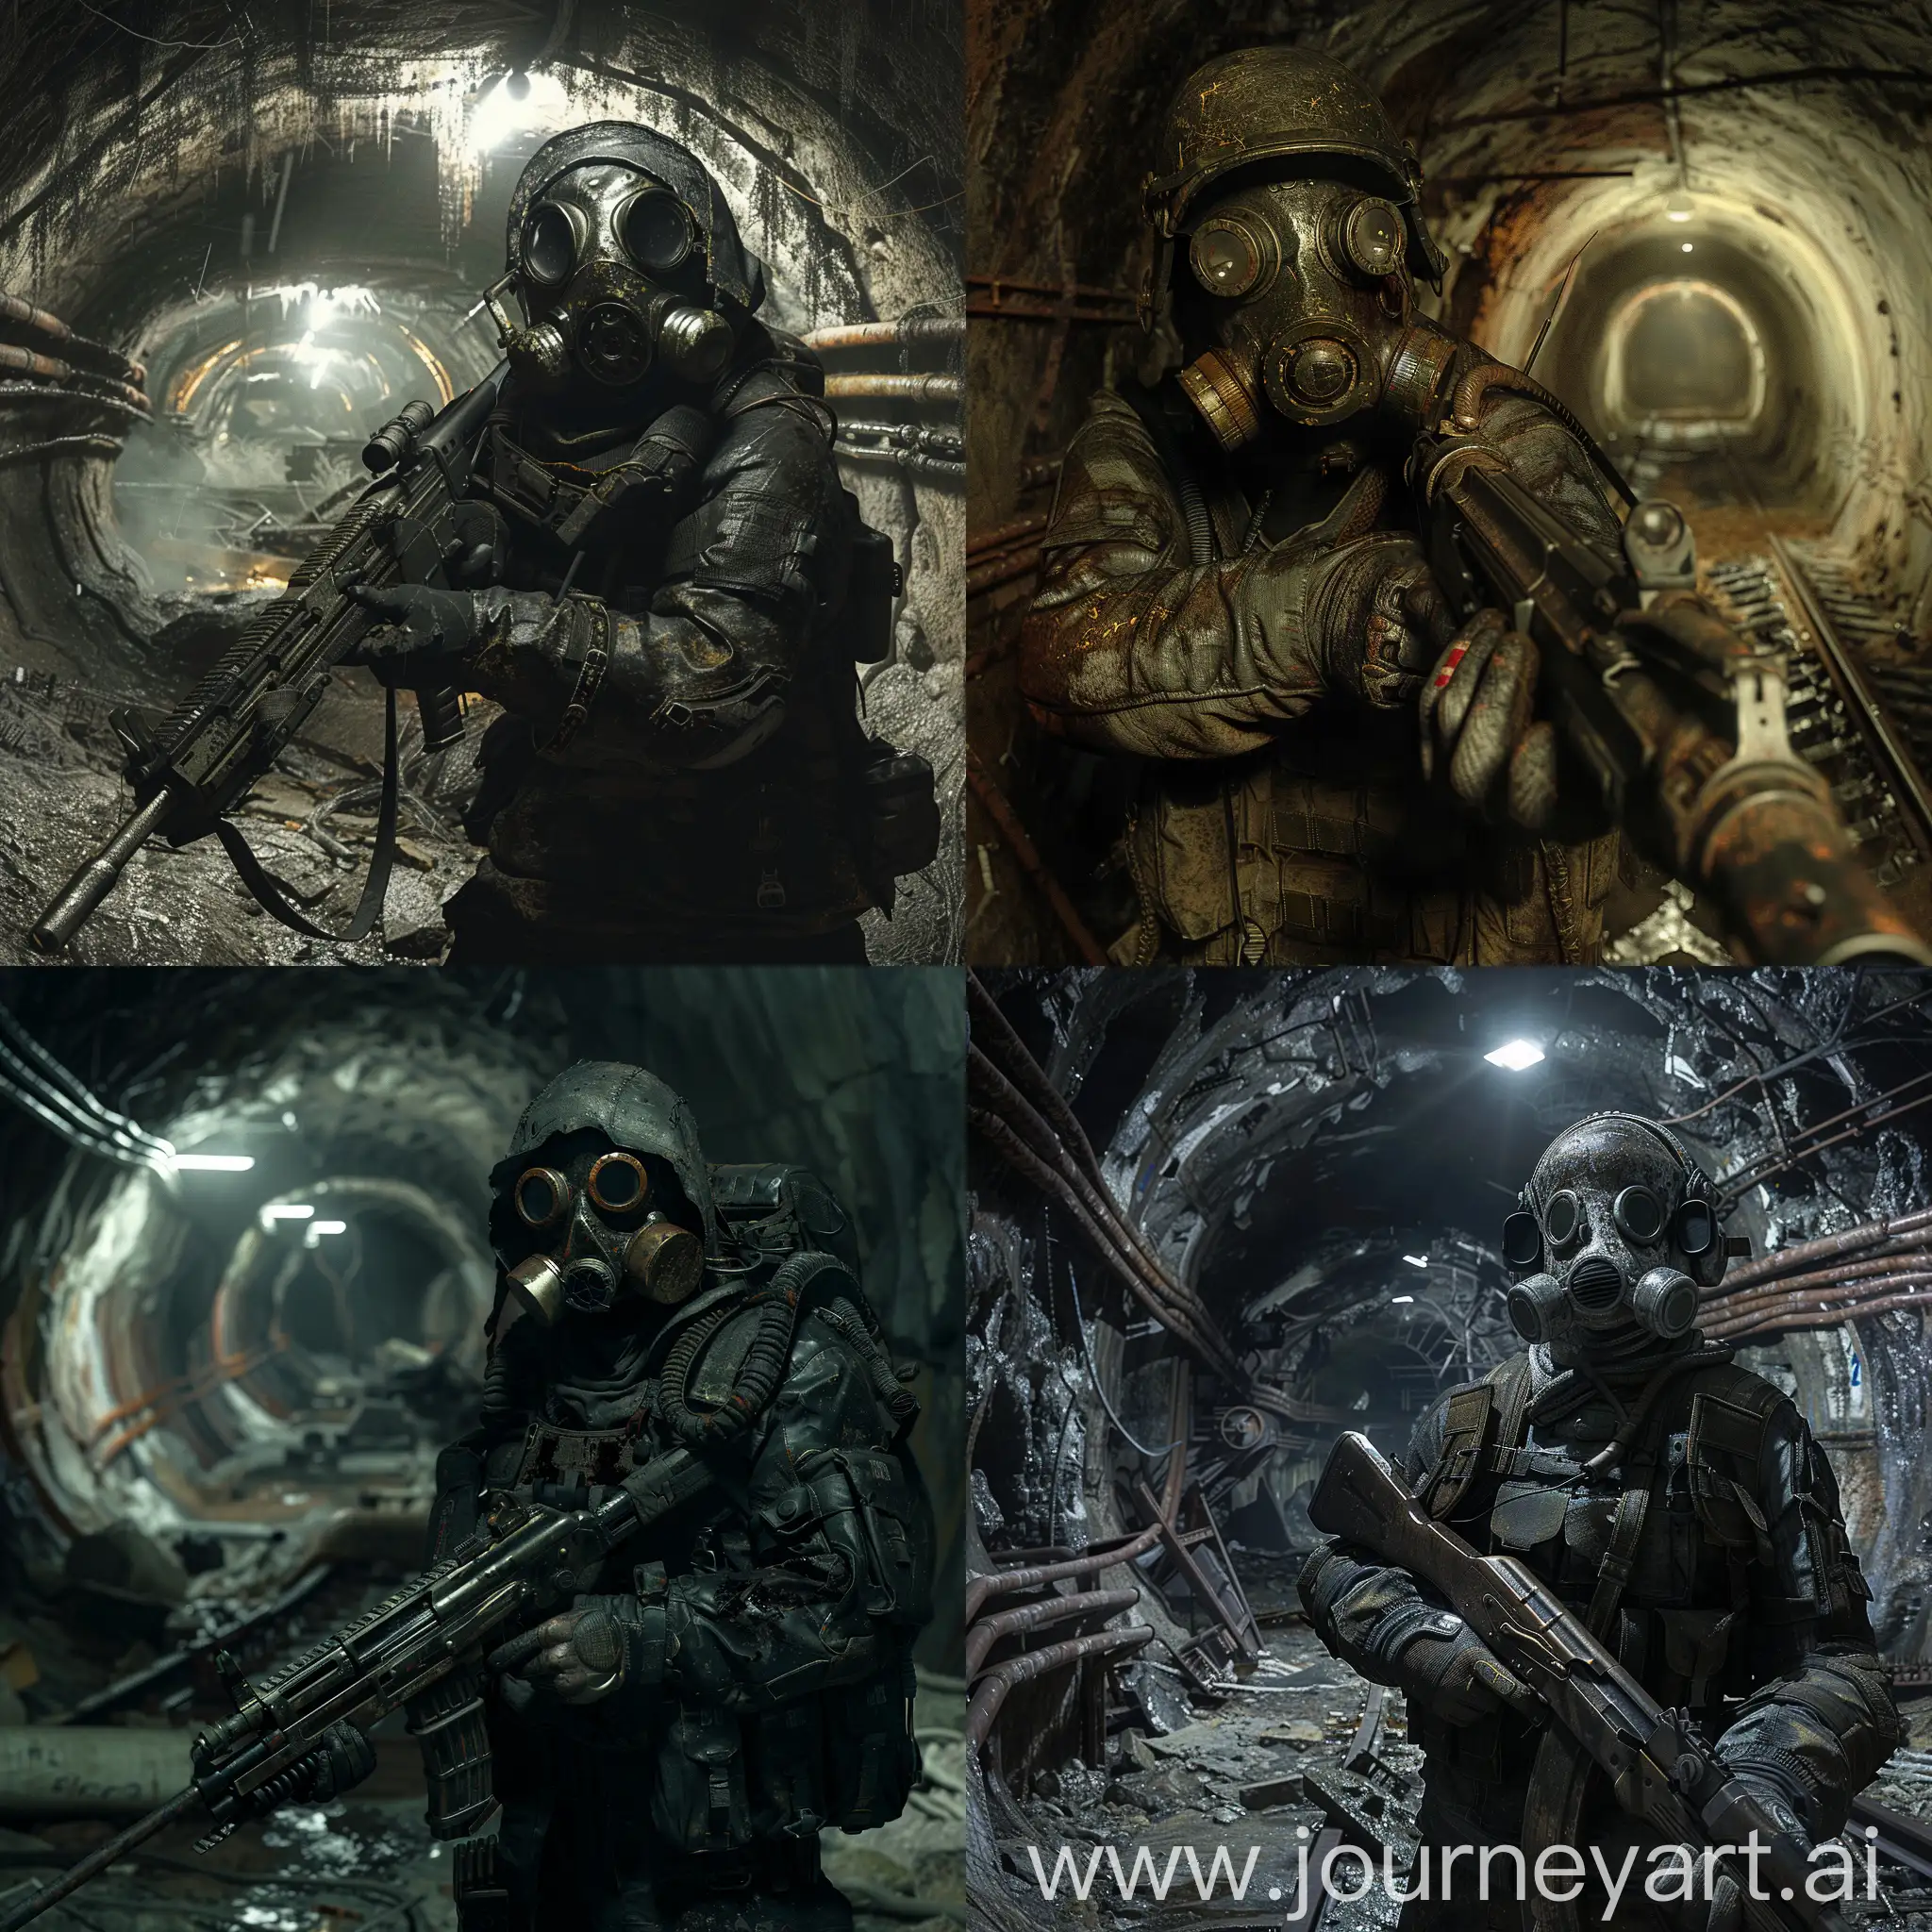 Metro 2033, survivor stand in post-apocalyptic armor and gasmask in a dirty and abandoned catacombs, he hold an old Soviet sniper rifle with both hands, lack of light sources, darkness, despondency, tension.